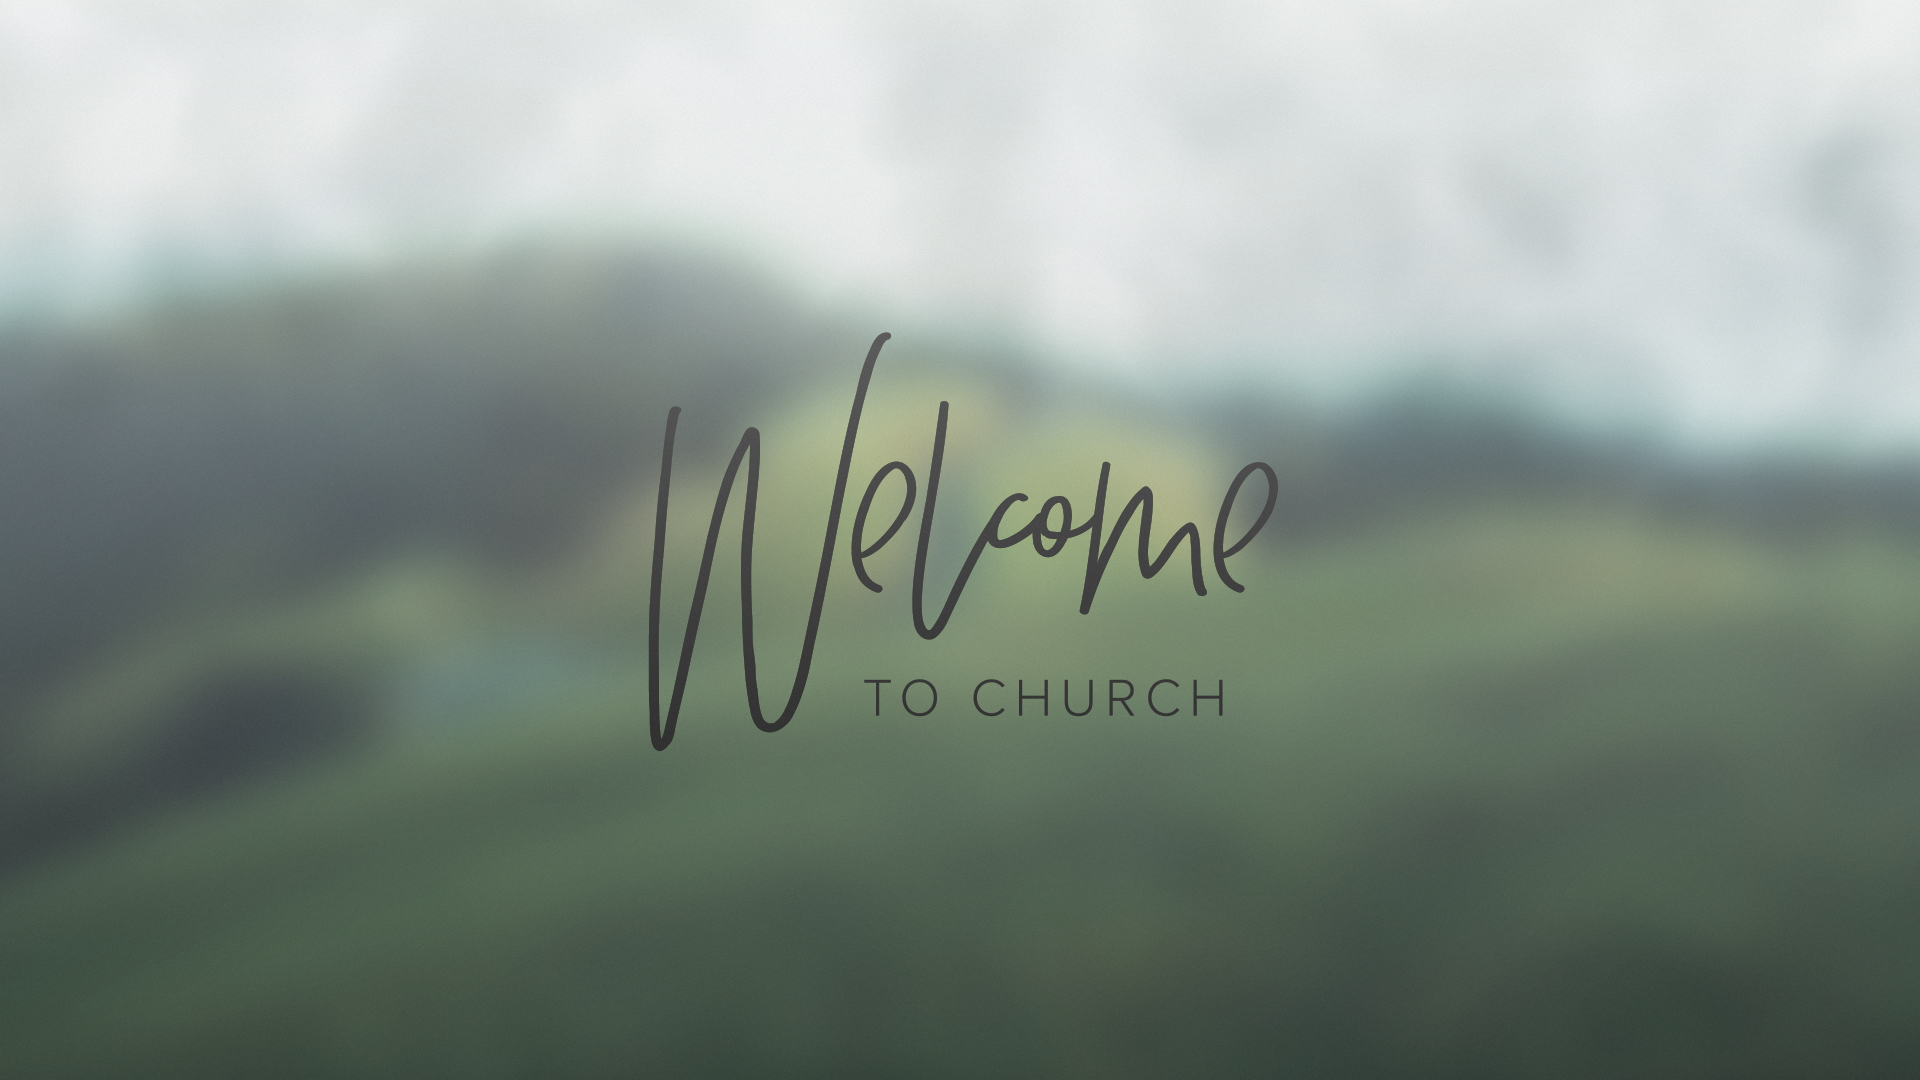 Church Welcome Background Image